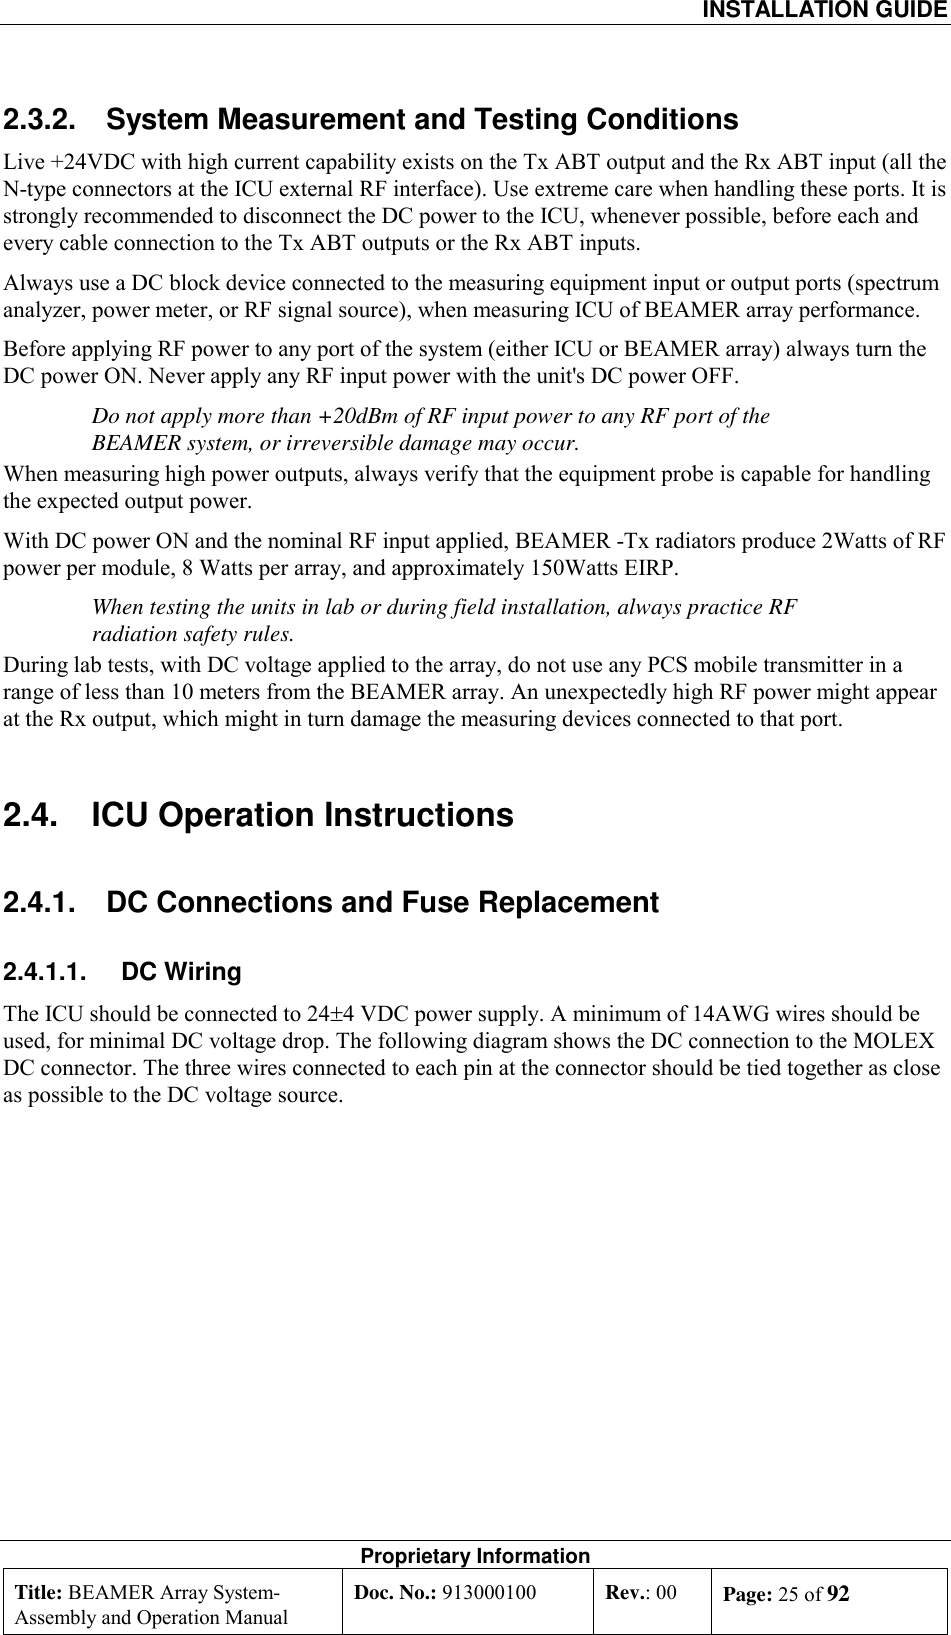  INSTALLATION GUIDE Proprietary Information Title: BEAMER Array System- Assembly and Operation Manual Doc. No.: 913000100  Rev.: 00  Page: 25 of 92  2.3.2.  System Measurement and Testing Conditions Live +24VDC with high current capability exists on the Tx ABT output and the Rx ABT input (all the N-type connectors at the ICU external RF interface). Use extreme care when handling these ports. It is strongly recommended to disconnect the DC power to the ICU, whenever possible, before each and every cable connection to the Tx ABT outputs or the Rx ABT inputs. Always use a DC block device connected to the measuring equipment input or output ports (spectrum analyzer, power meter, or RF signal source), when measuring ICU of BEAMER array performance.  Before applying RF power to any port of the system (either ICU or BEAMER array) always turn the DC power ON. Never apply any RF input power with the unit&apos;s DC power OFF. Do not apply more than +20dBm of RF input power to any RF port of the BEAMER system, or irreversible damage may occur. When measuring high power outputs, always verify that the equipment probe is capable for handling the expected output power. With DC power ON and the nominal RF input applied, BEAMER -Tx radiators produce 2Watts of RF power per module, 8 Watts per array, and approximately 150Watts EIRP.  When testing the units in lab or during field installation, always practice RF radiation safety rules. During lab tests, with DC voltage applied to the array, do not use any PCS mobile transmitter in a range of less than 10 meters from the BEAMER array. An unexpectedly high RF power might appear at the Rx output, which might in turn damage the measuring devices connected to that port. 2.4.  ICU Operation Instructions 2.4.1.  DC Connections and Fuse Replacement 2.4.1.1. DC Wiring The ICU should be connected to 24±4 VDC power supply. A minimum of 14AWG wires should be used, for minimal DC voltage drop. The following diagram shows the DC connection to the MOLEX DC connector. The three wires connected to each pin at the connector should be tied together as close as possible to the DC voltage source. 